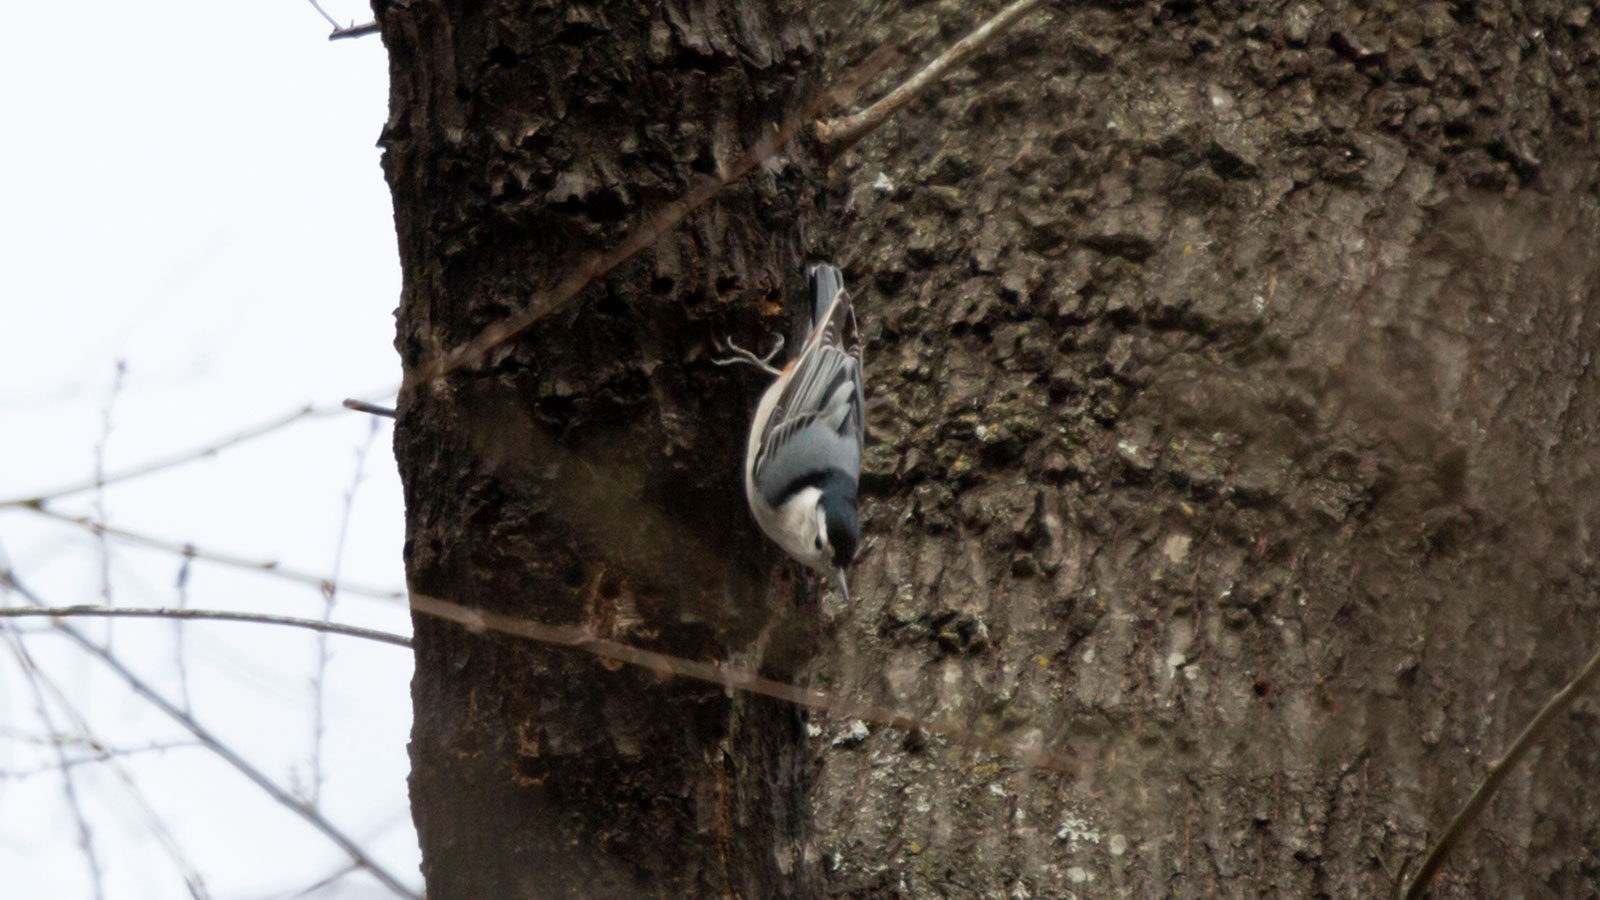 White-breasted nuthatch clinging to a tree trunk in North Louisiana